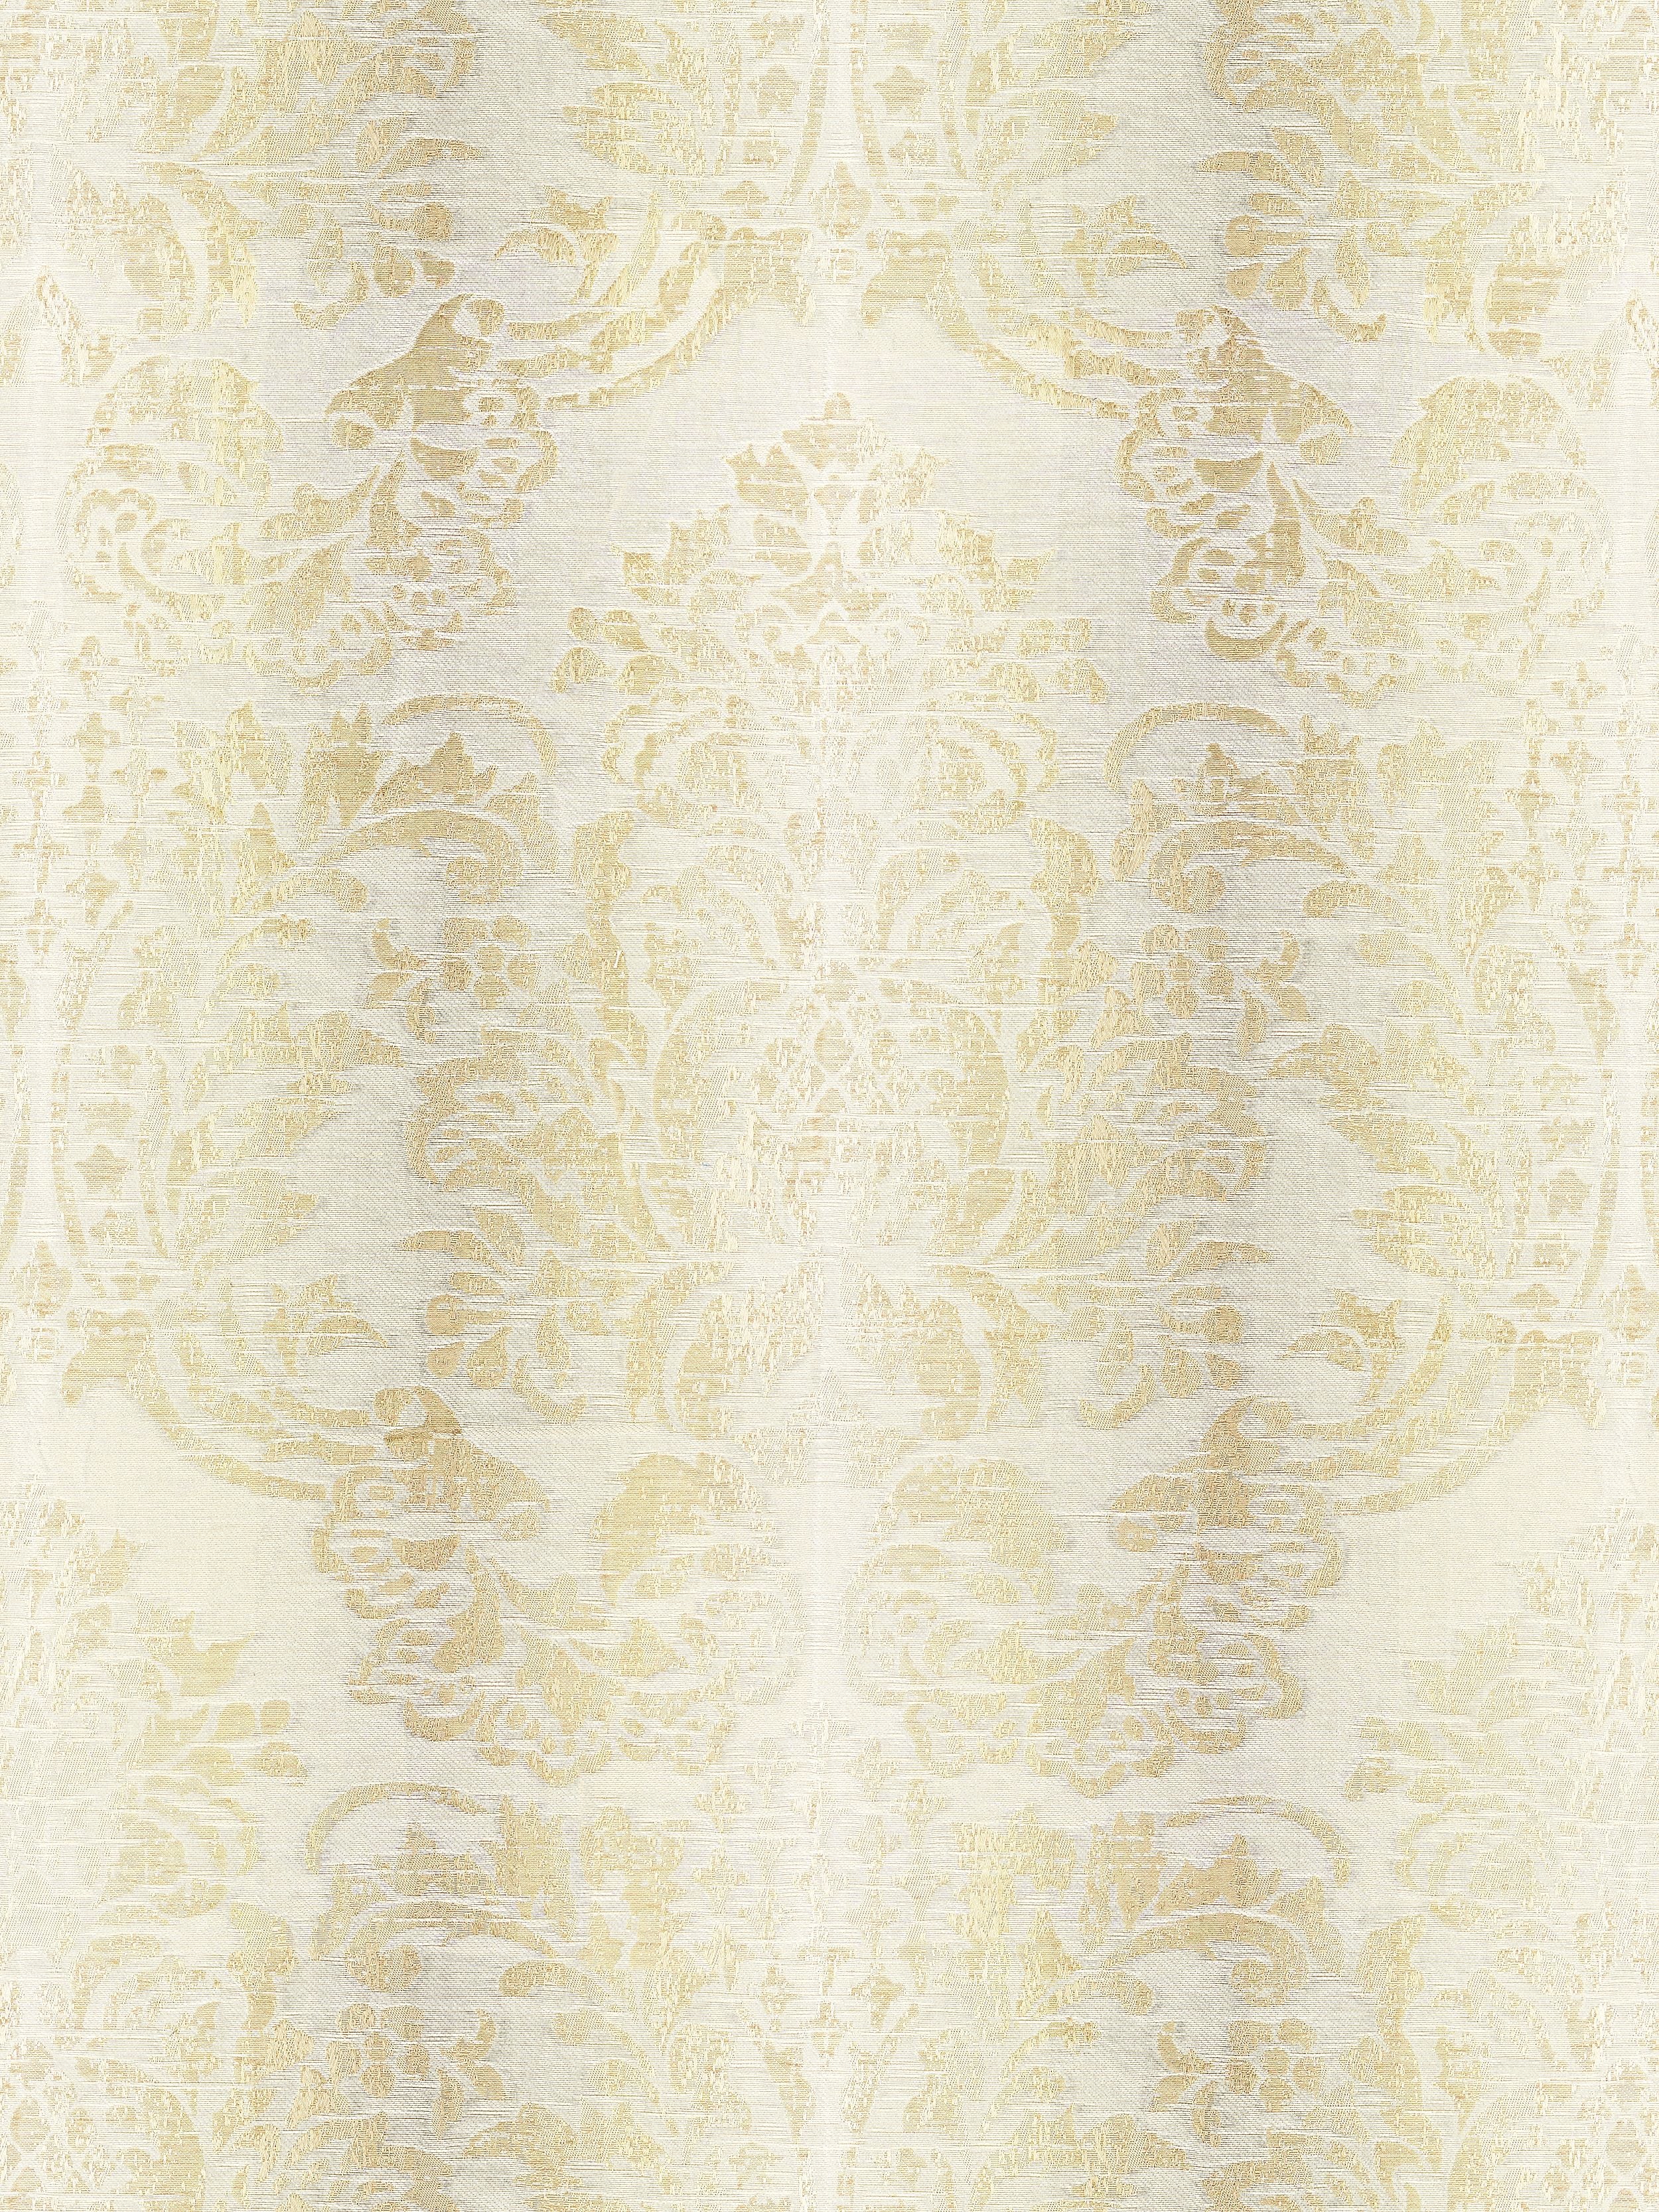 Sorrento Linen Damask fabric in parchment color - pattern number SC 000127093 - by Scalamandre in the Scalamandre Fabrics Book 1 collection